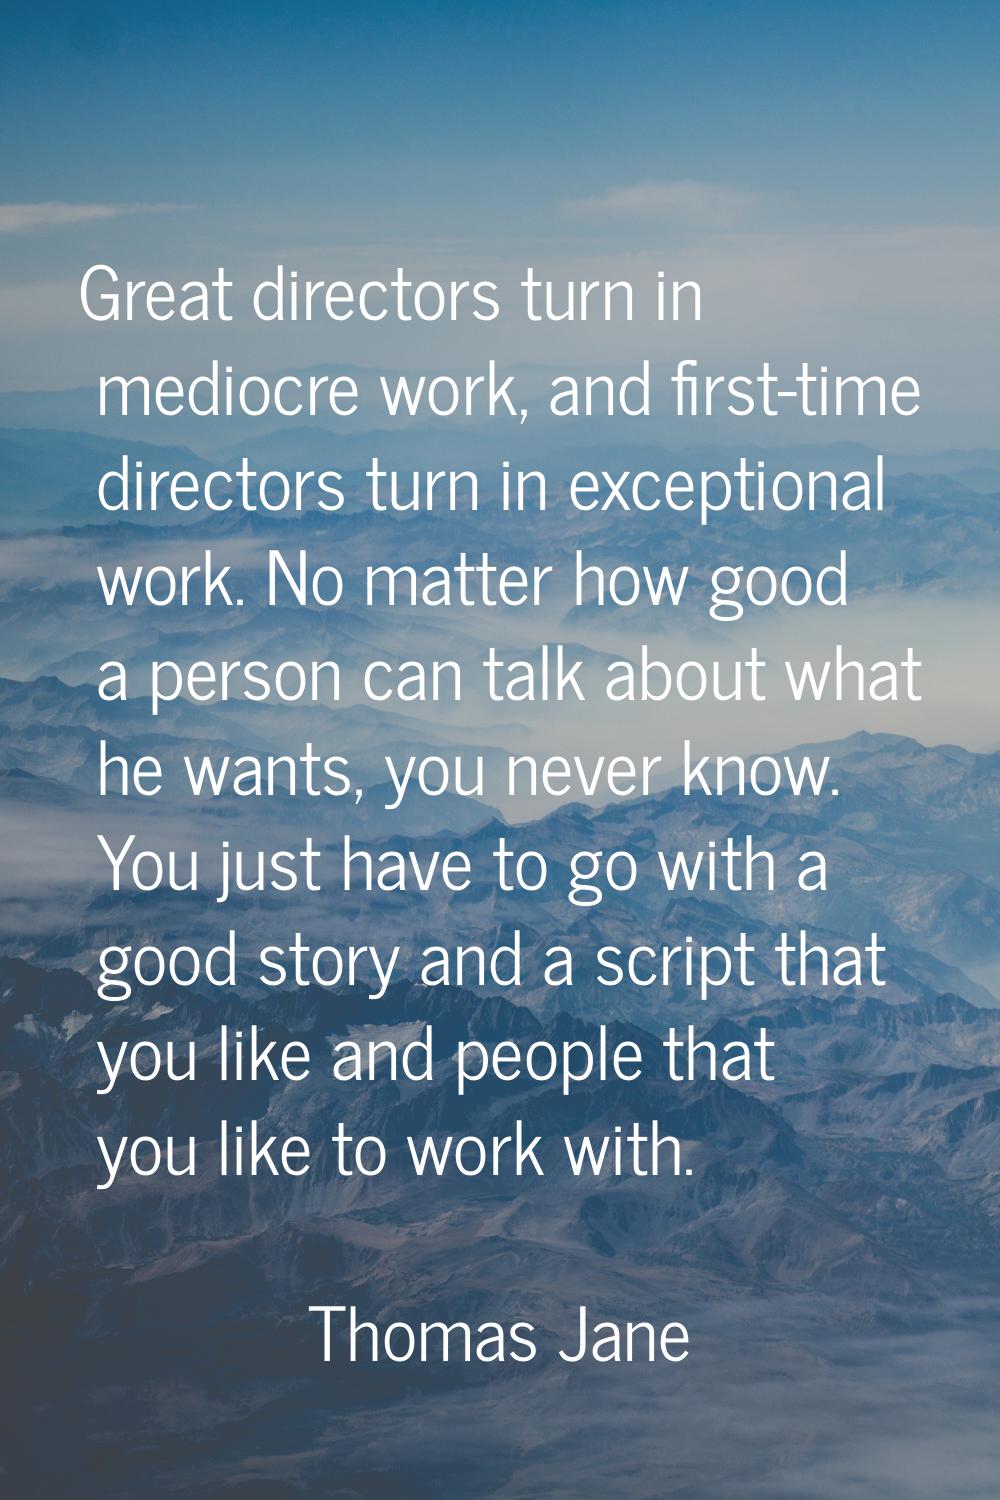 Great directors turn in mediocre work, and first-time directors turn in exceptional work. No matter